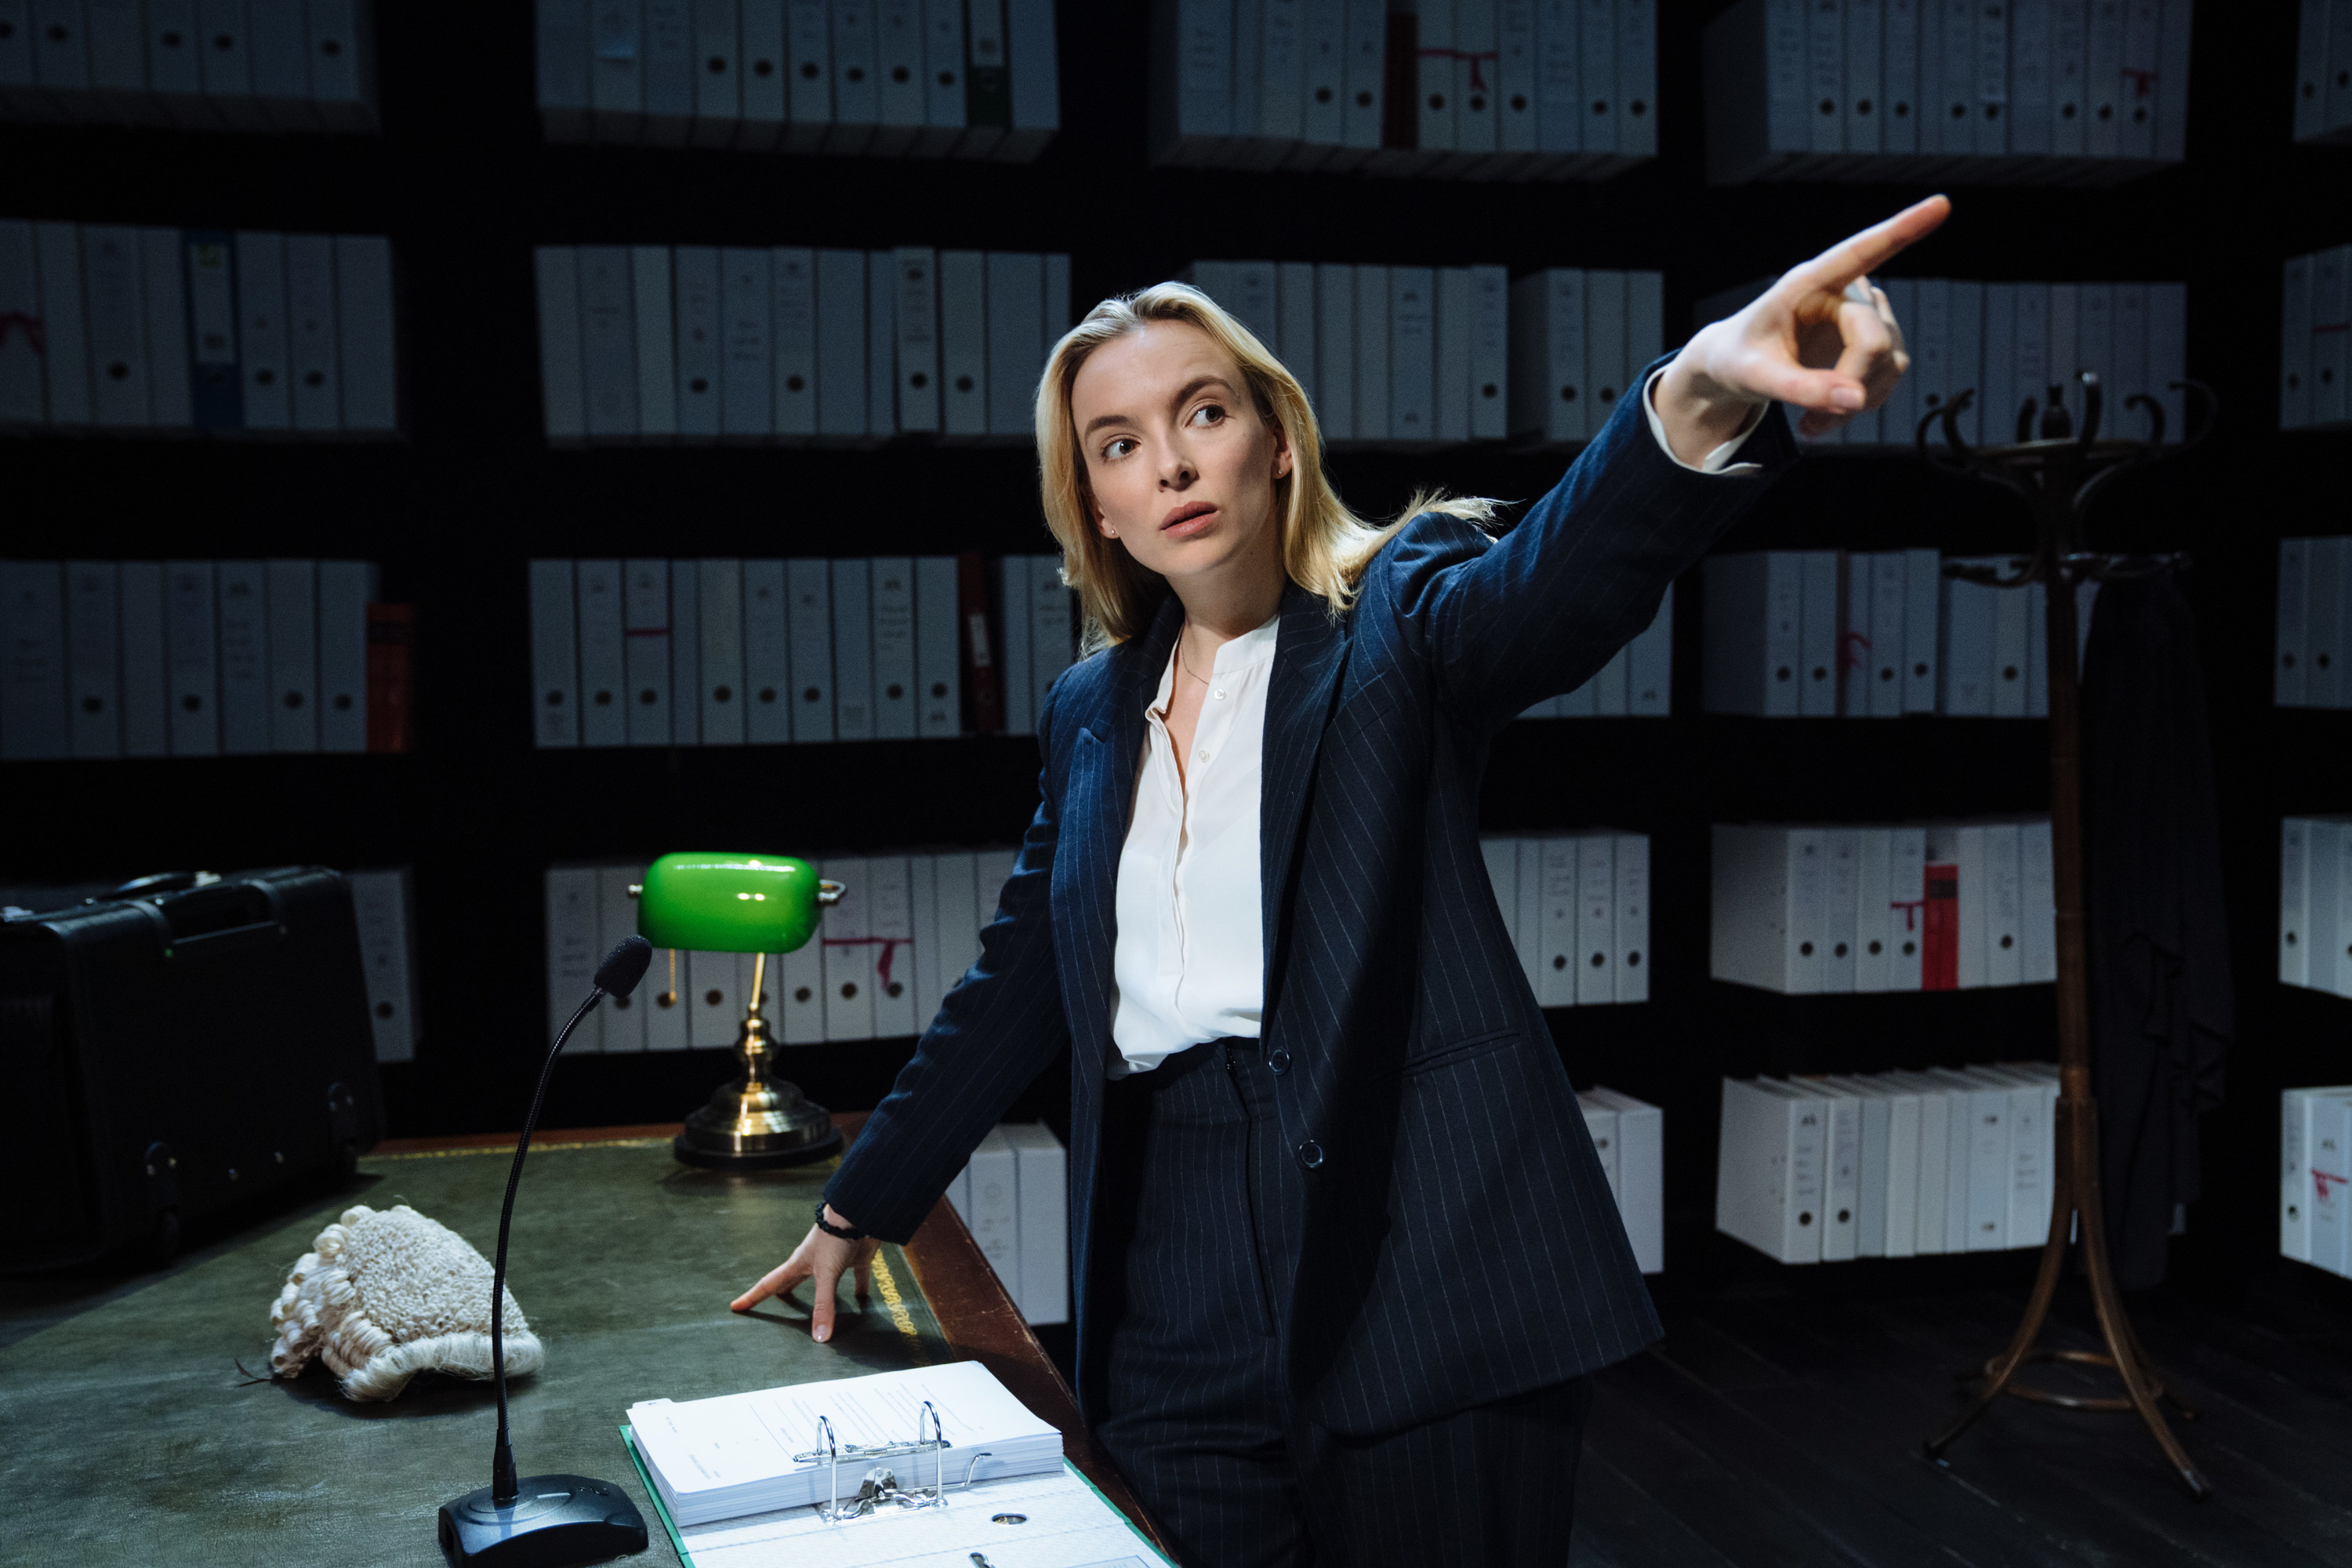 Jodie as the lawyer pointing towards something as with a file open before her